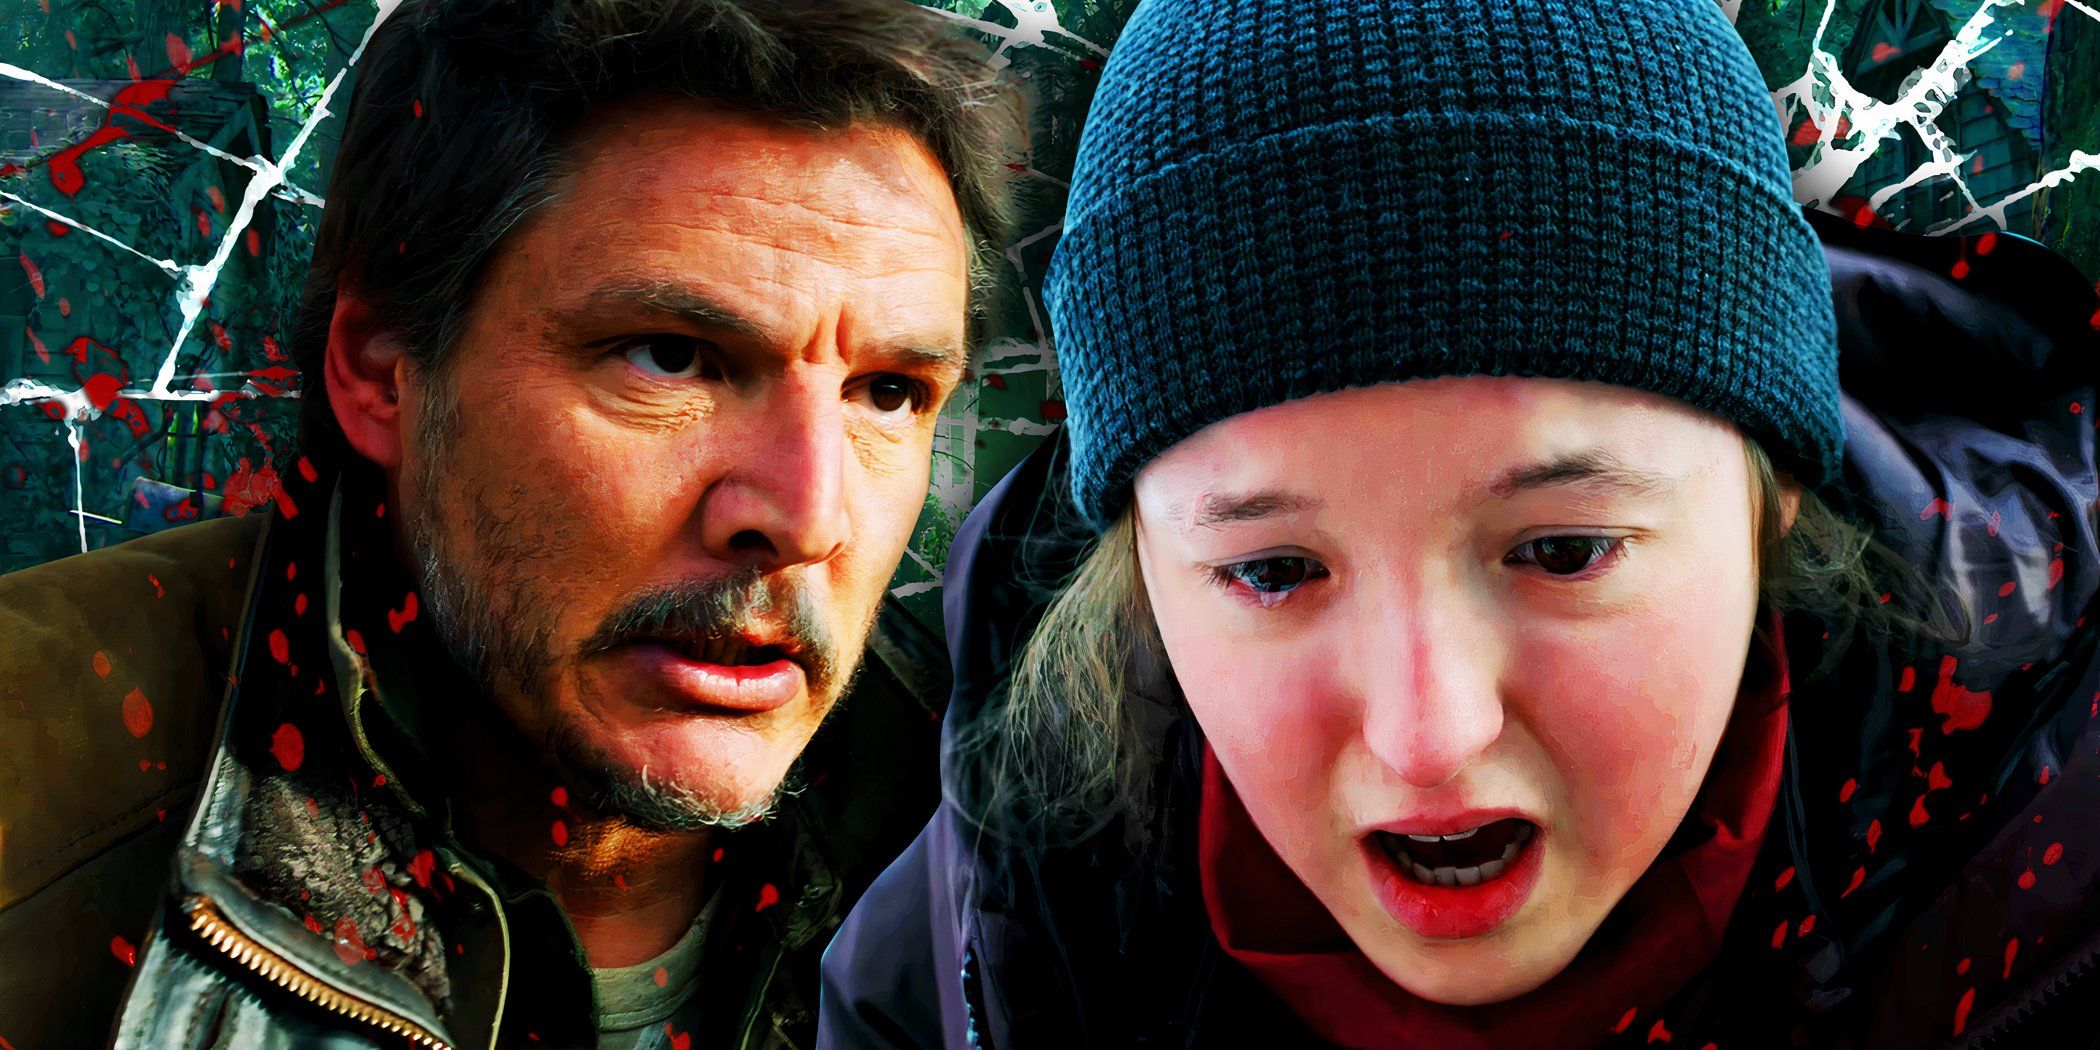 Pedro Pascal looking shocked as Joel next to Bella Ramsey crying as Ellie from The Last of Us (2023)